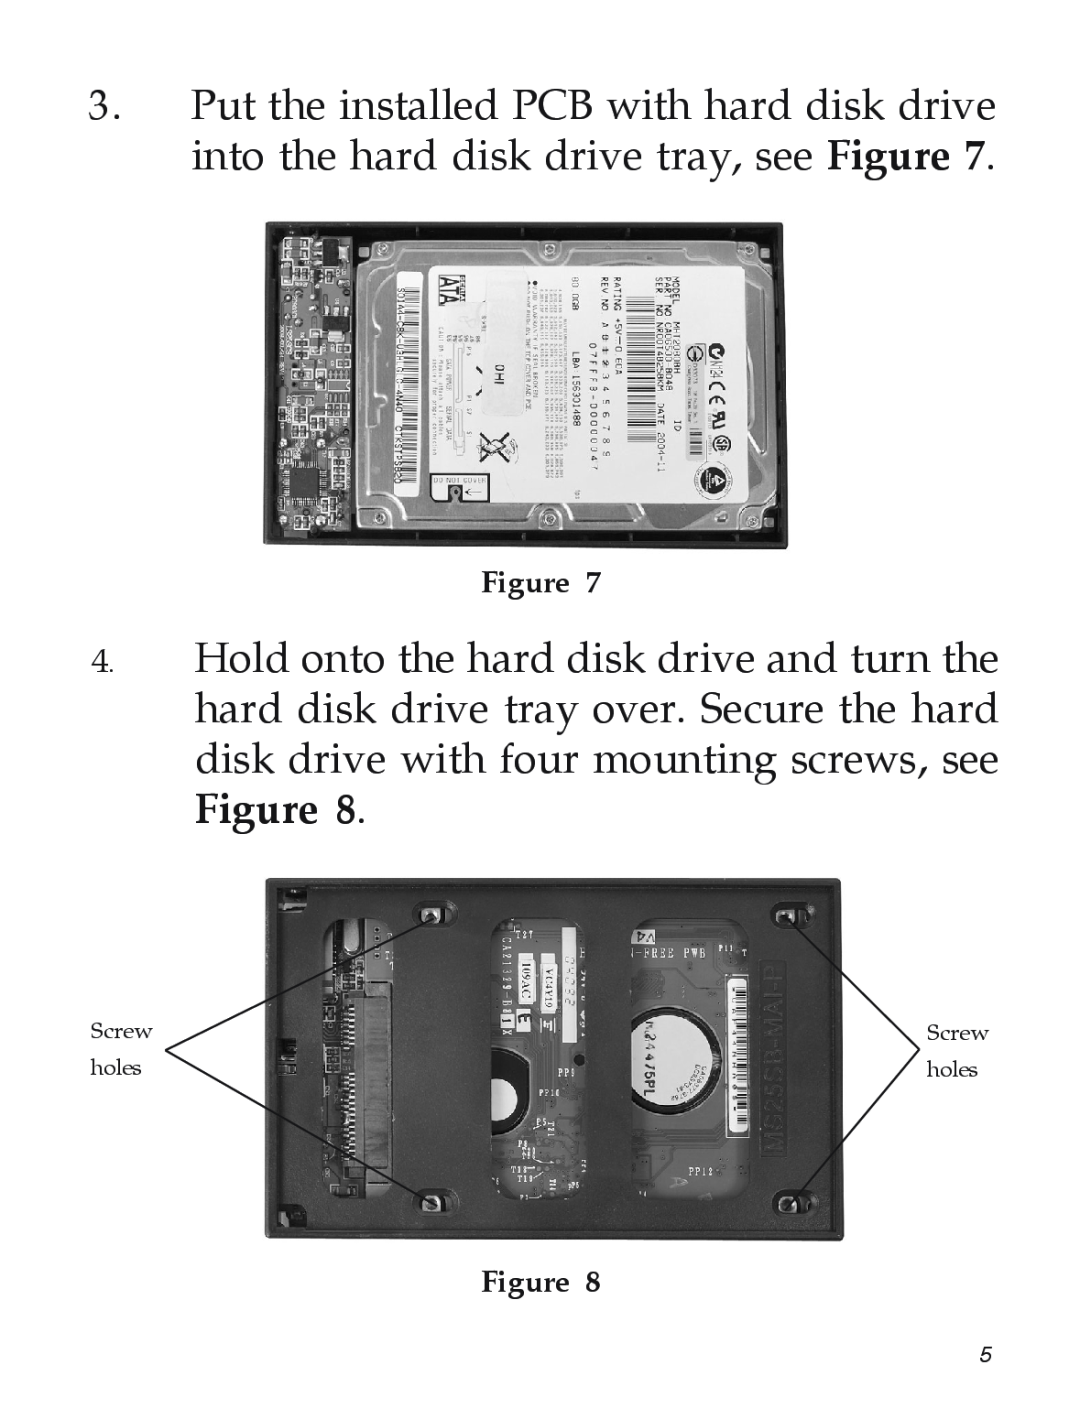 SIIG 5090S manual Put the installed PCB with hard disk drive into the hard disk drive tray, see Figure 